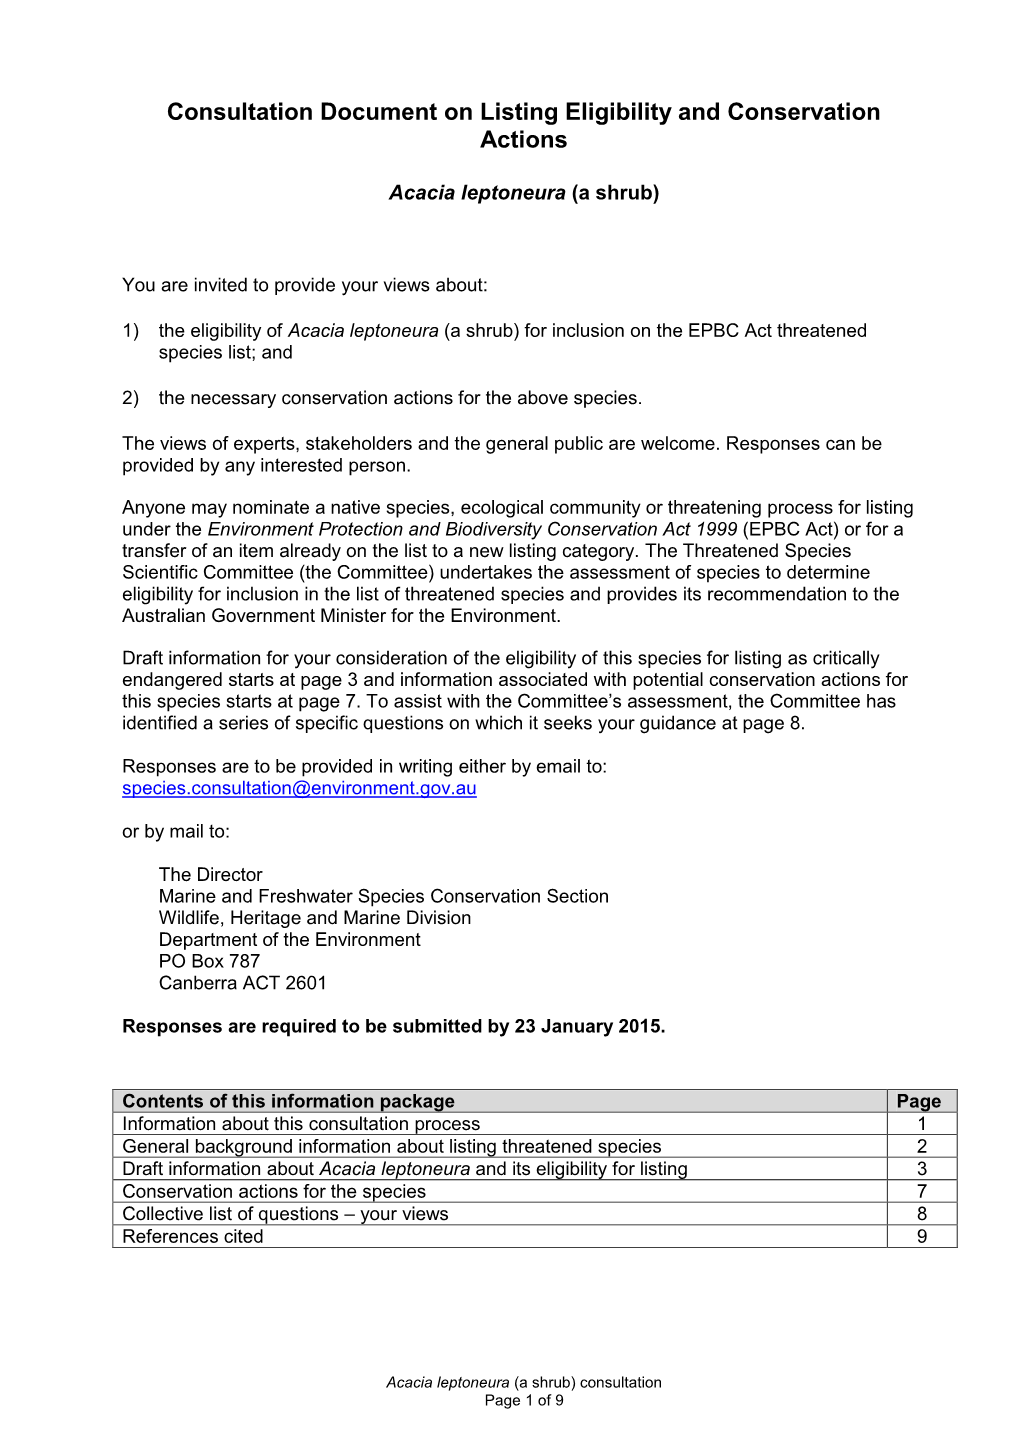 Consultation Document on Listing Eligibility and Conservation Actions